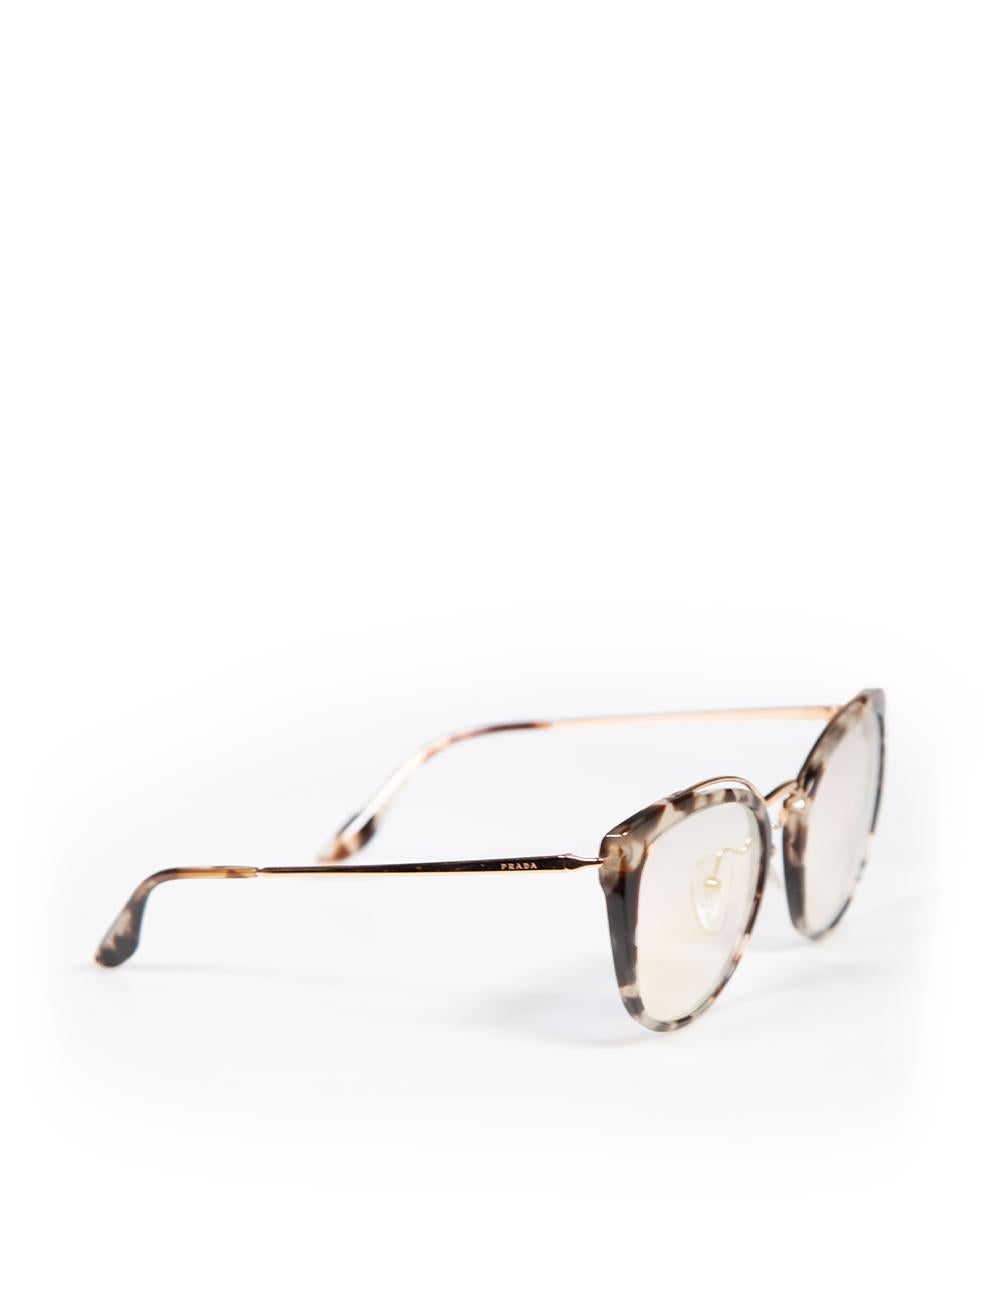 CONDITION is Very good. Hardly any visible wear to sunglasses is evident on this used Prada designer resale item.
 
 
 
 Details
 
 
 Brown
 
 Plastic
 
 Sunglasses
 
 Tortoiseshell pattern
 
 Cat-eye frames
 
 Reflective lens
 
 
 
 
 
 Made in